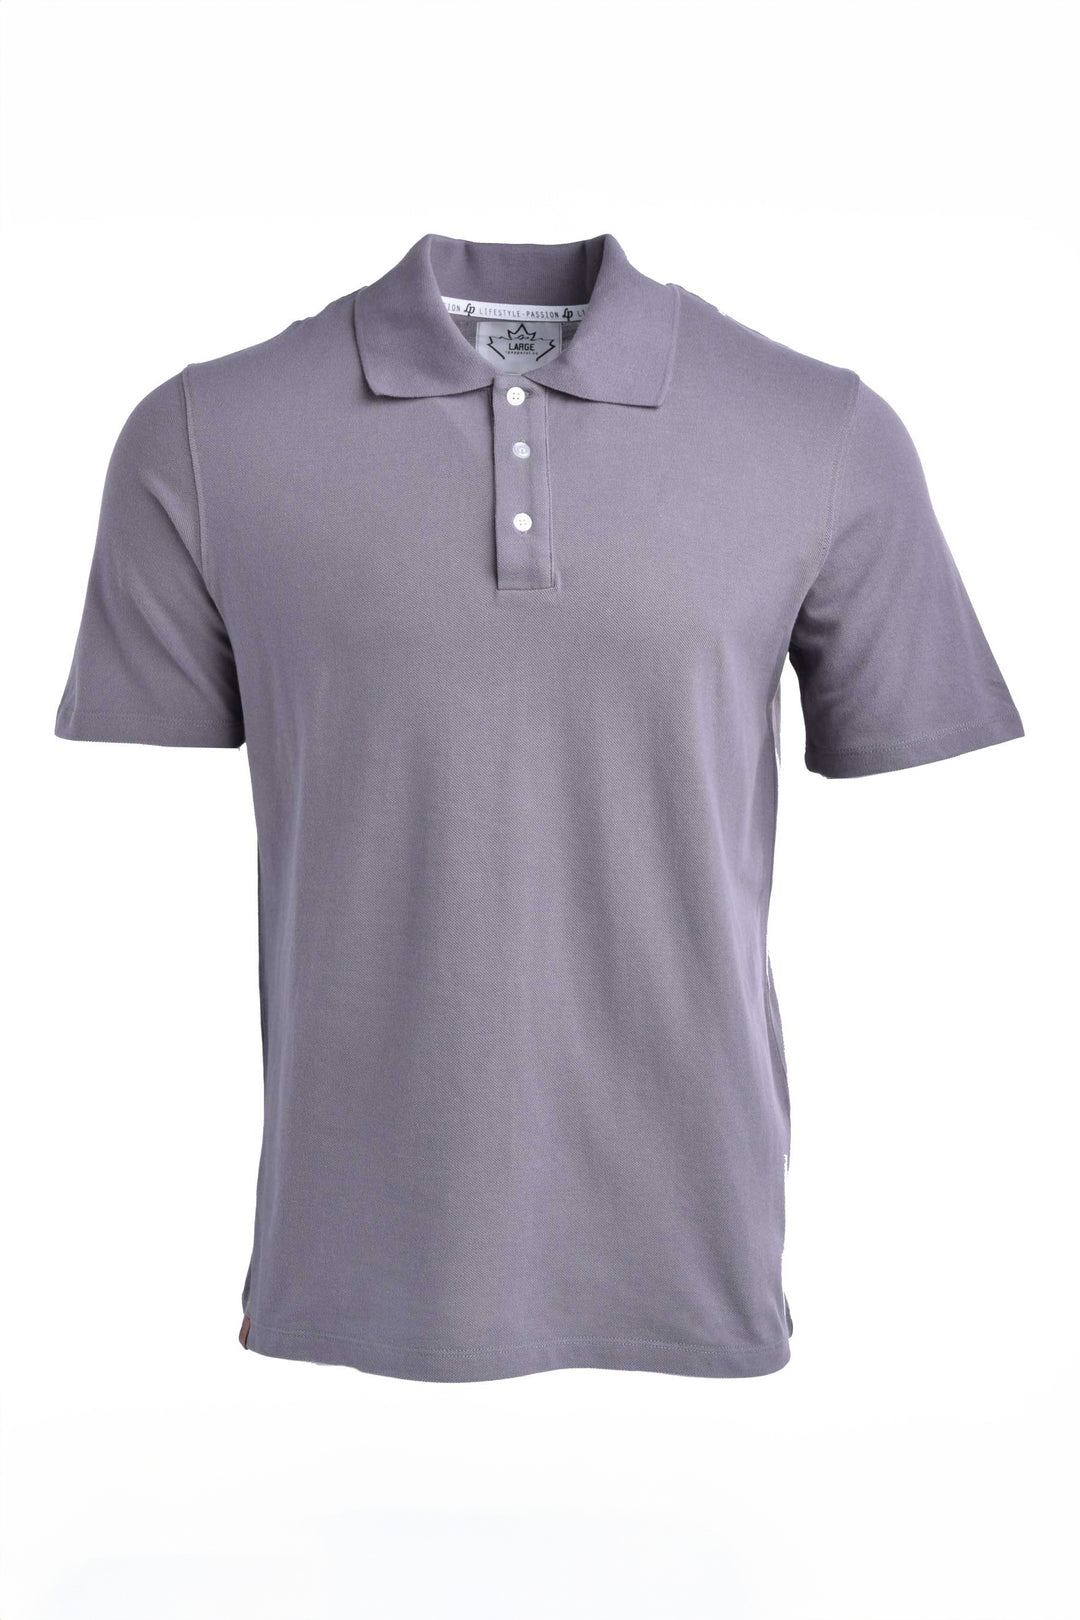 Short-sleeved braided cotton polo shirt [Gray]